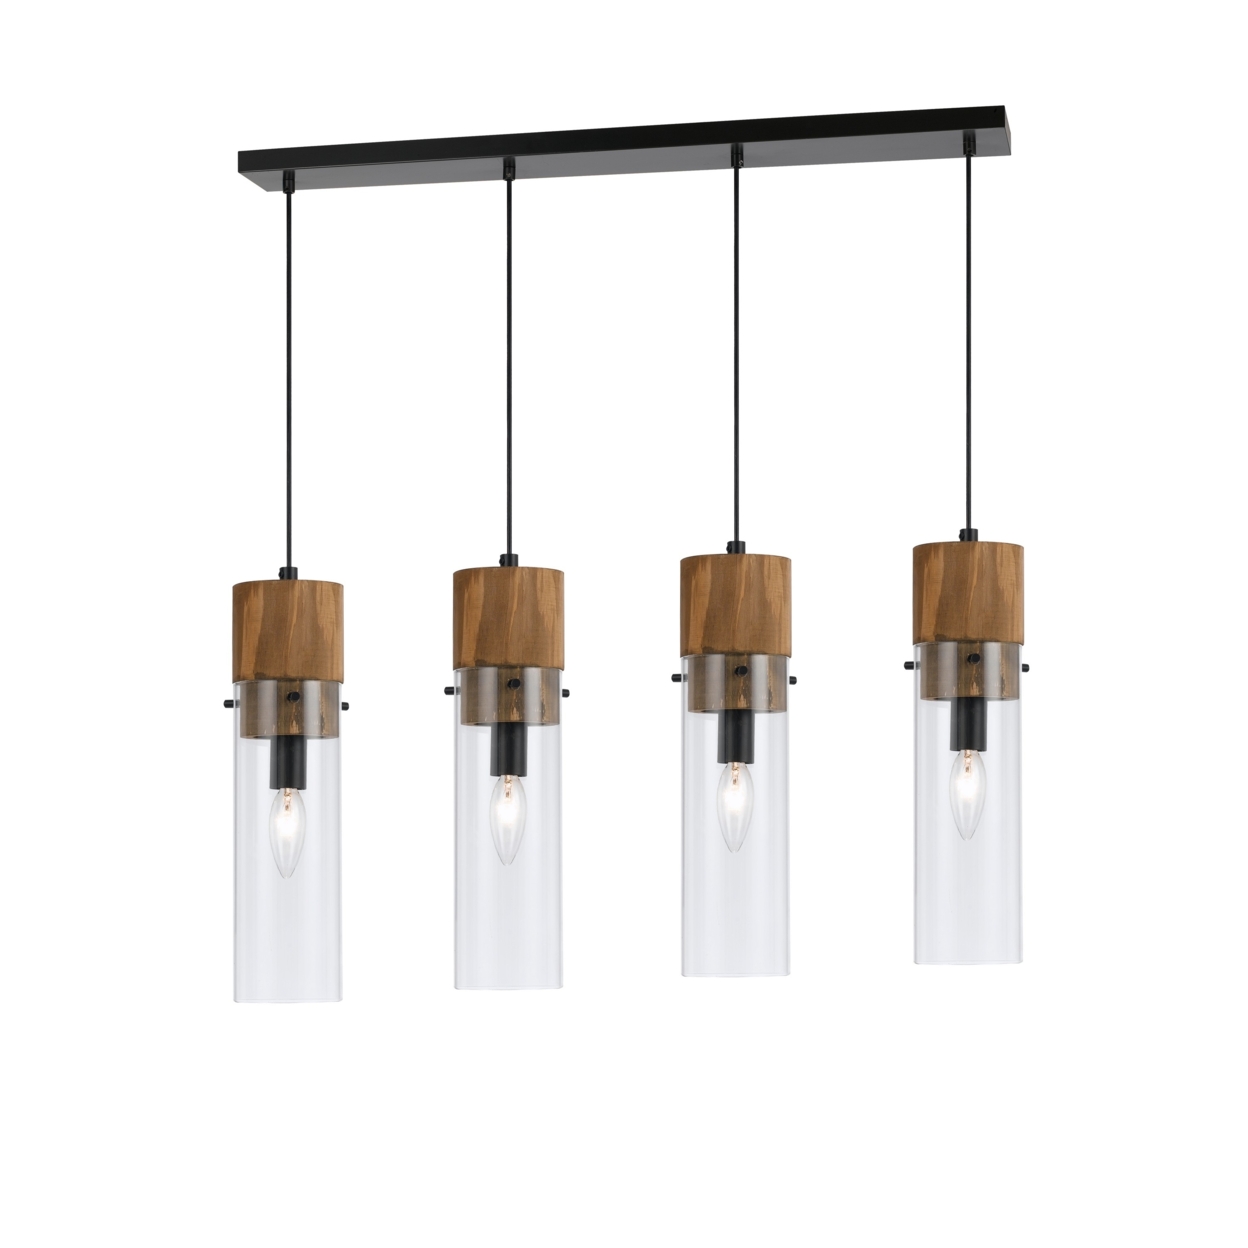 60 X 4 Watt Wood And Metal Fixture With Cylindrical Shades, Brown And Black- Saltoro Sherpi